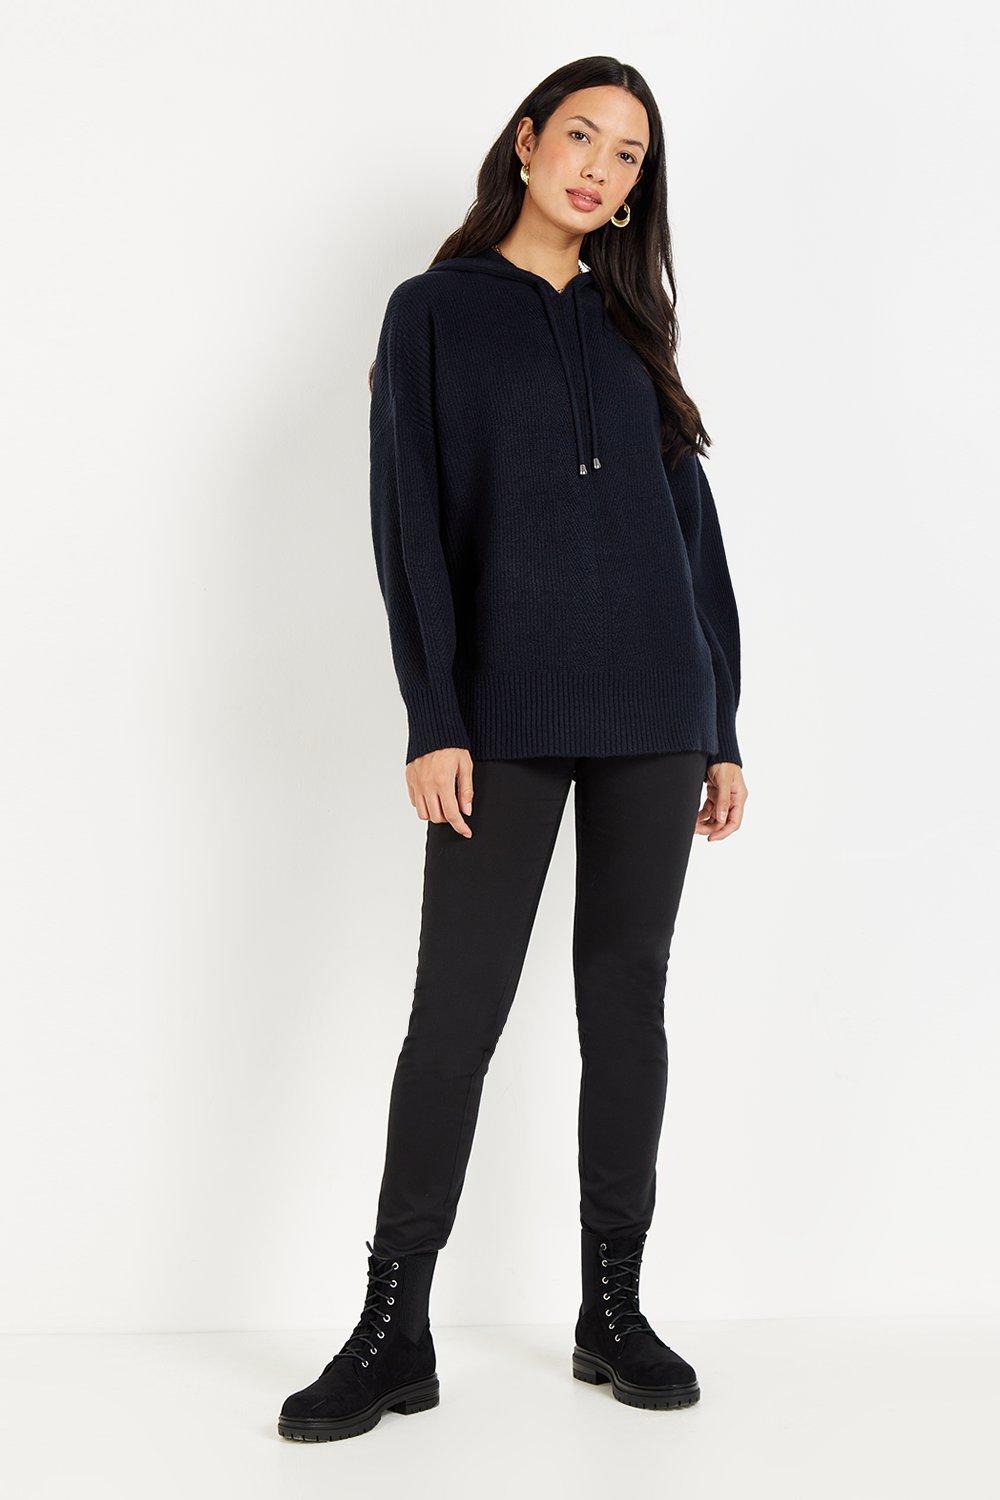 This Cosy Hoody Is Perfect For Your New Season Wardrobe. A Deep Navy Hue Is Versatile And Easy To Pair, Whilst A Comfy Knitted Texture Will Have You Wearing This On-Repeat.  Jumper Hooded Long Sleeve Relaxed Casual 70% Acrylic,28% Polyester,2% Elastane. M